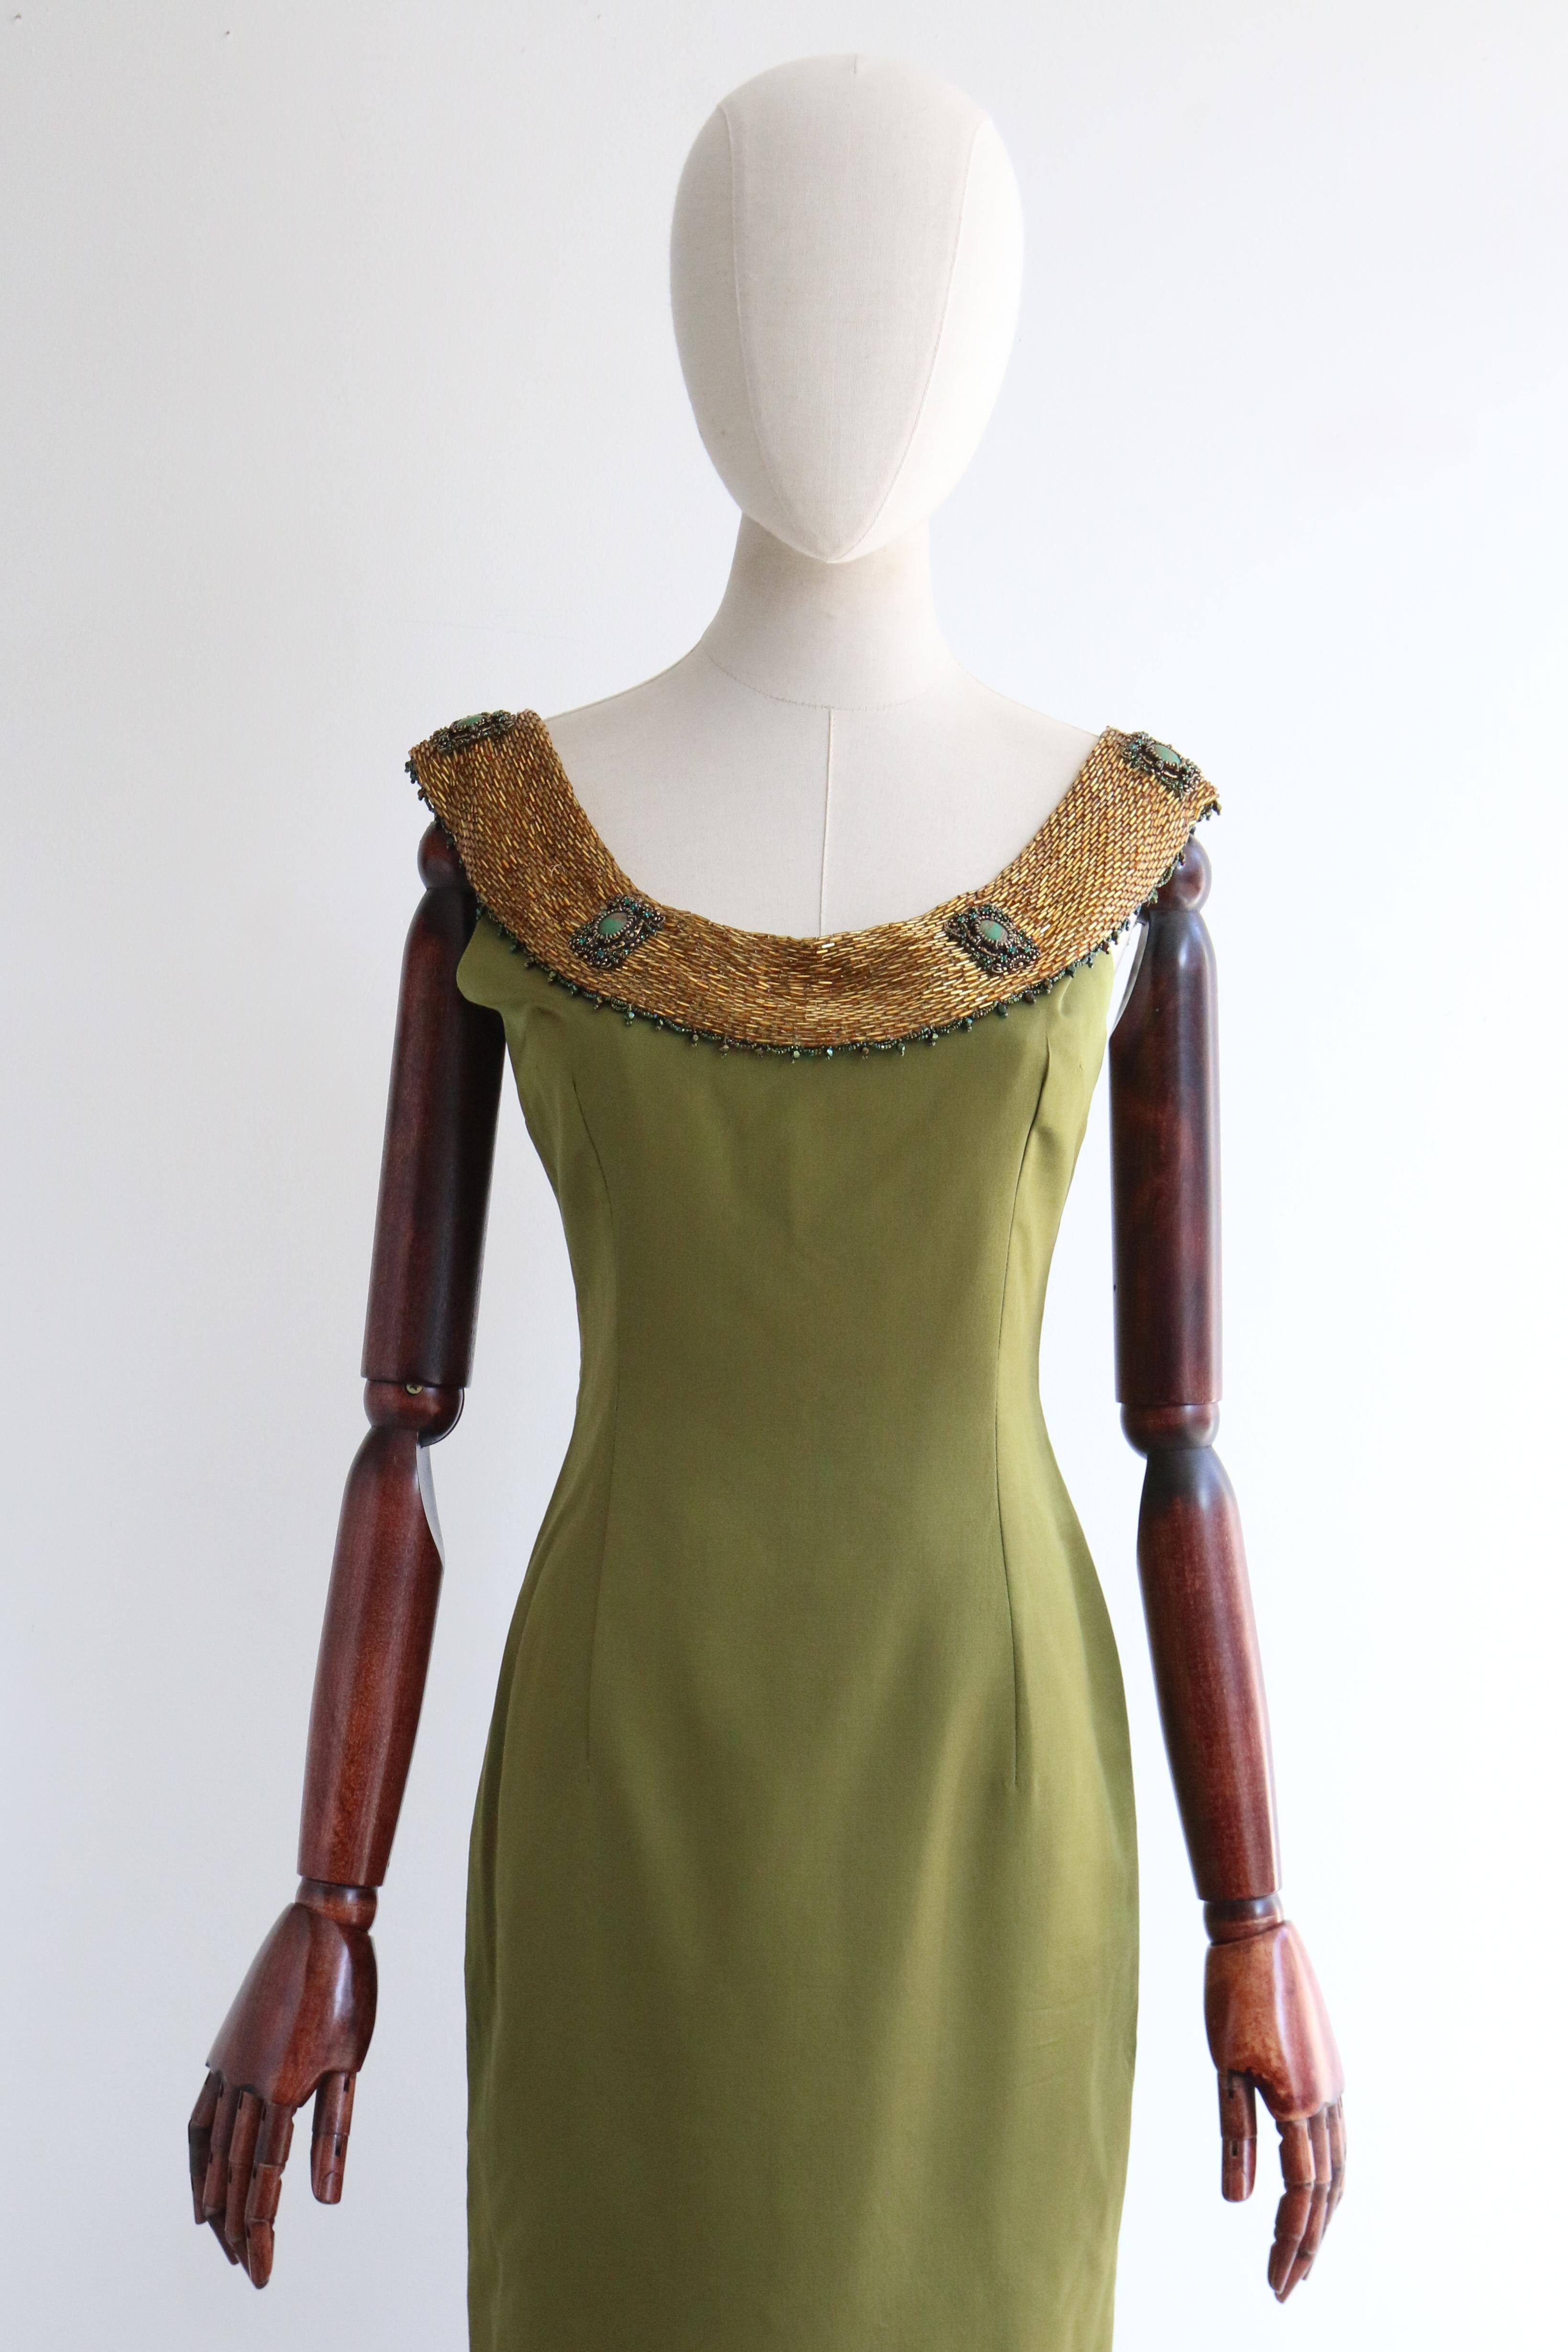 A classic silhouette rendered in a deep shade of olive green silk, embellished with gold and green beadwork, this original 1960's dress is a rare piece to behold and a perfect statement piece for your cocktail wardrobe.

The rounded neckline of the